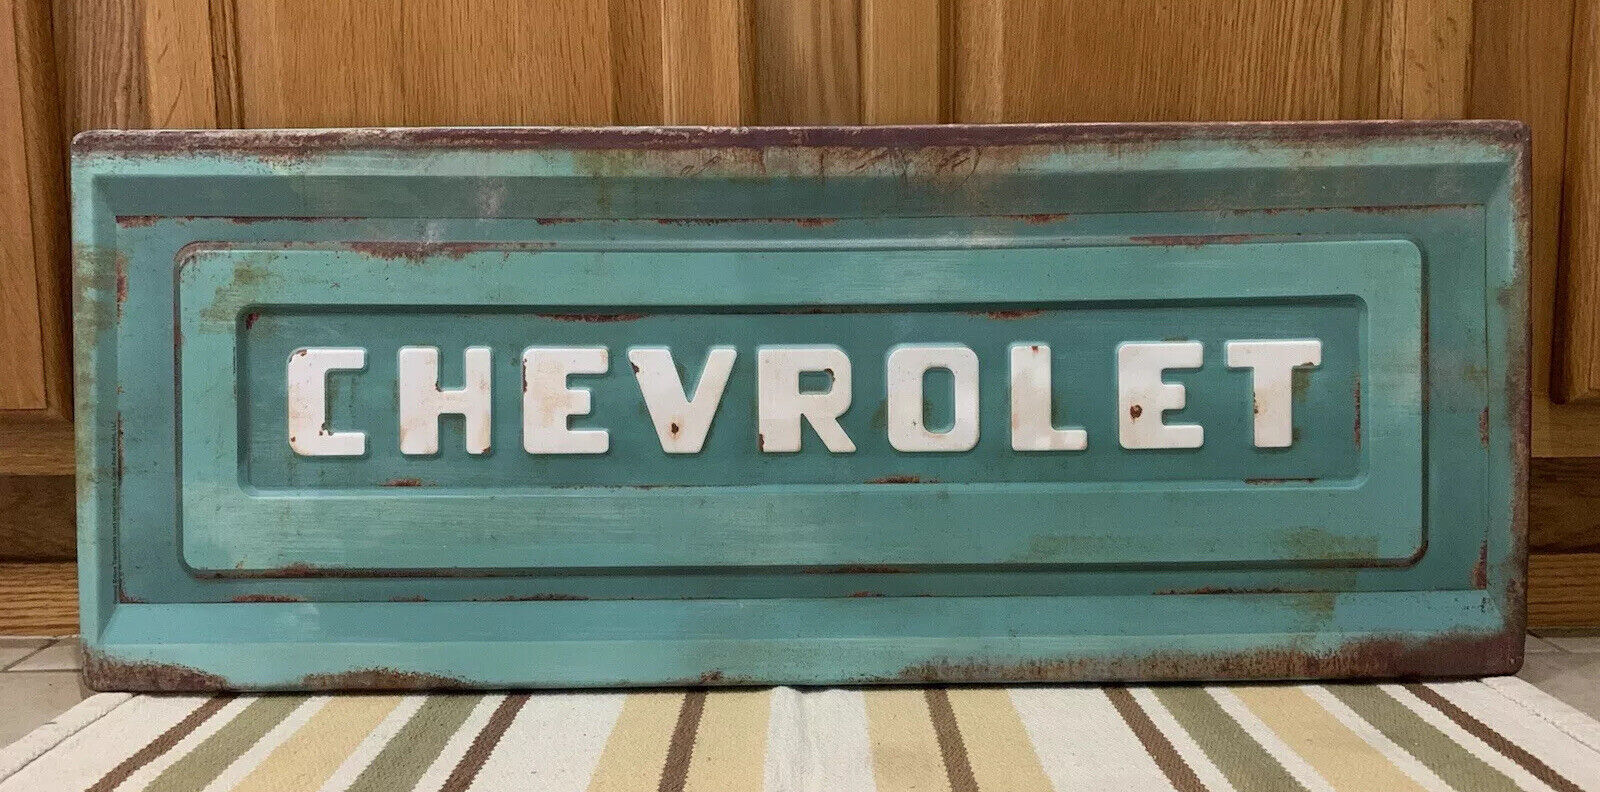 Chevrolet Sign Tailgate Wall Decor Garage Truck Car Parts Vintage Style Chevy